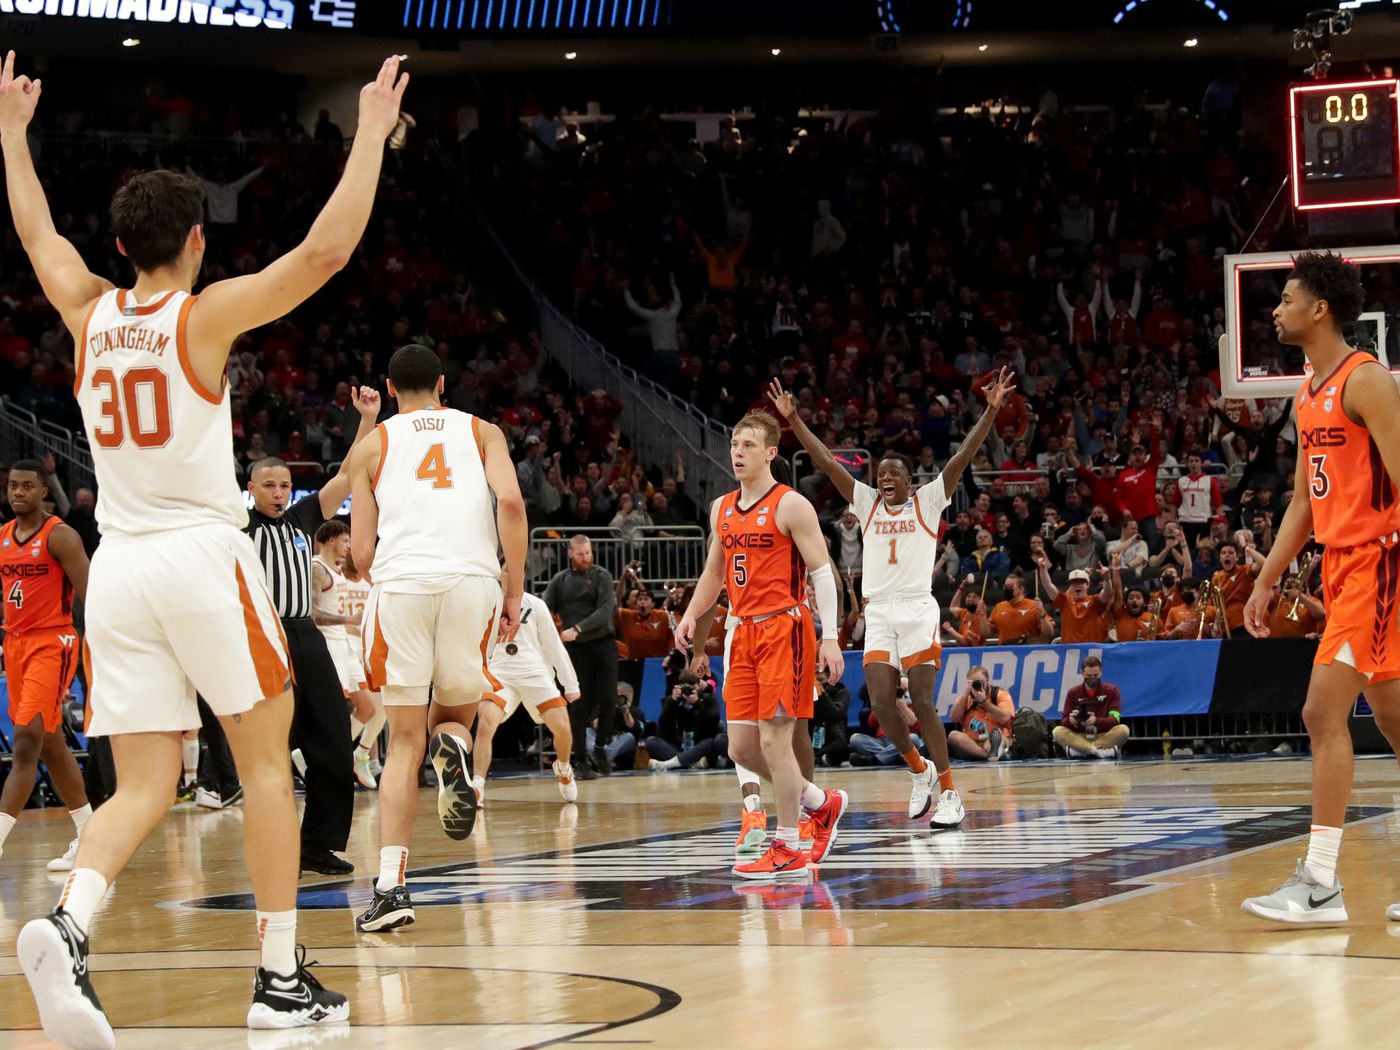 No. 6 seed Texas beats No. 11 seed Virginia Tech, 81-73, for first NCAA  Tournament win since 2014 - Burnt Orange Nation